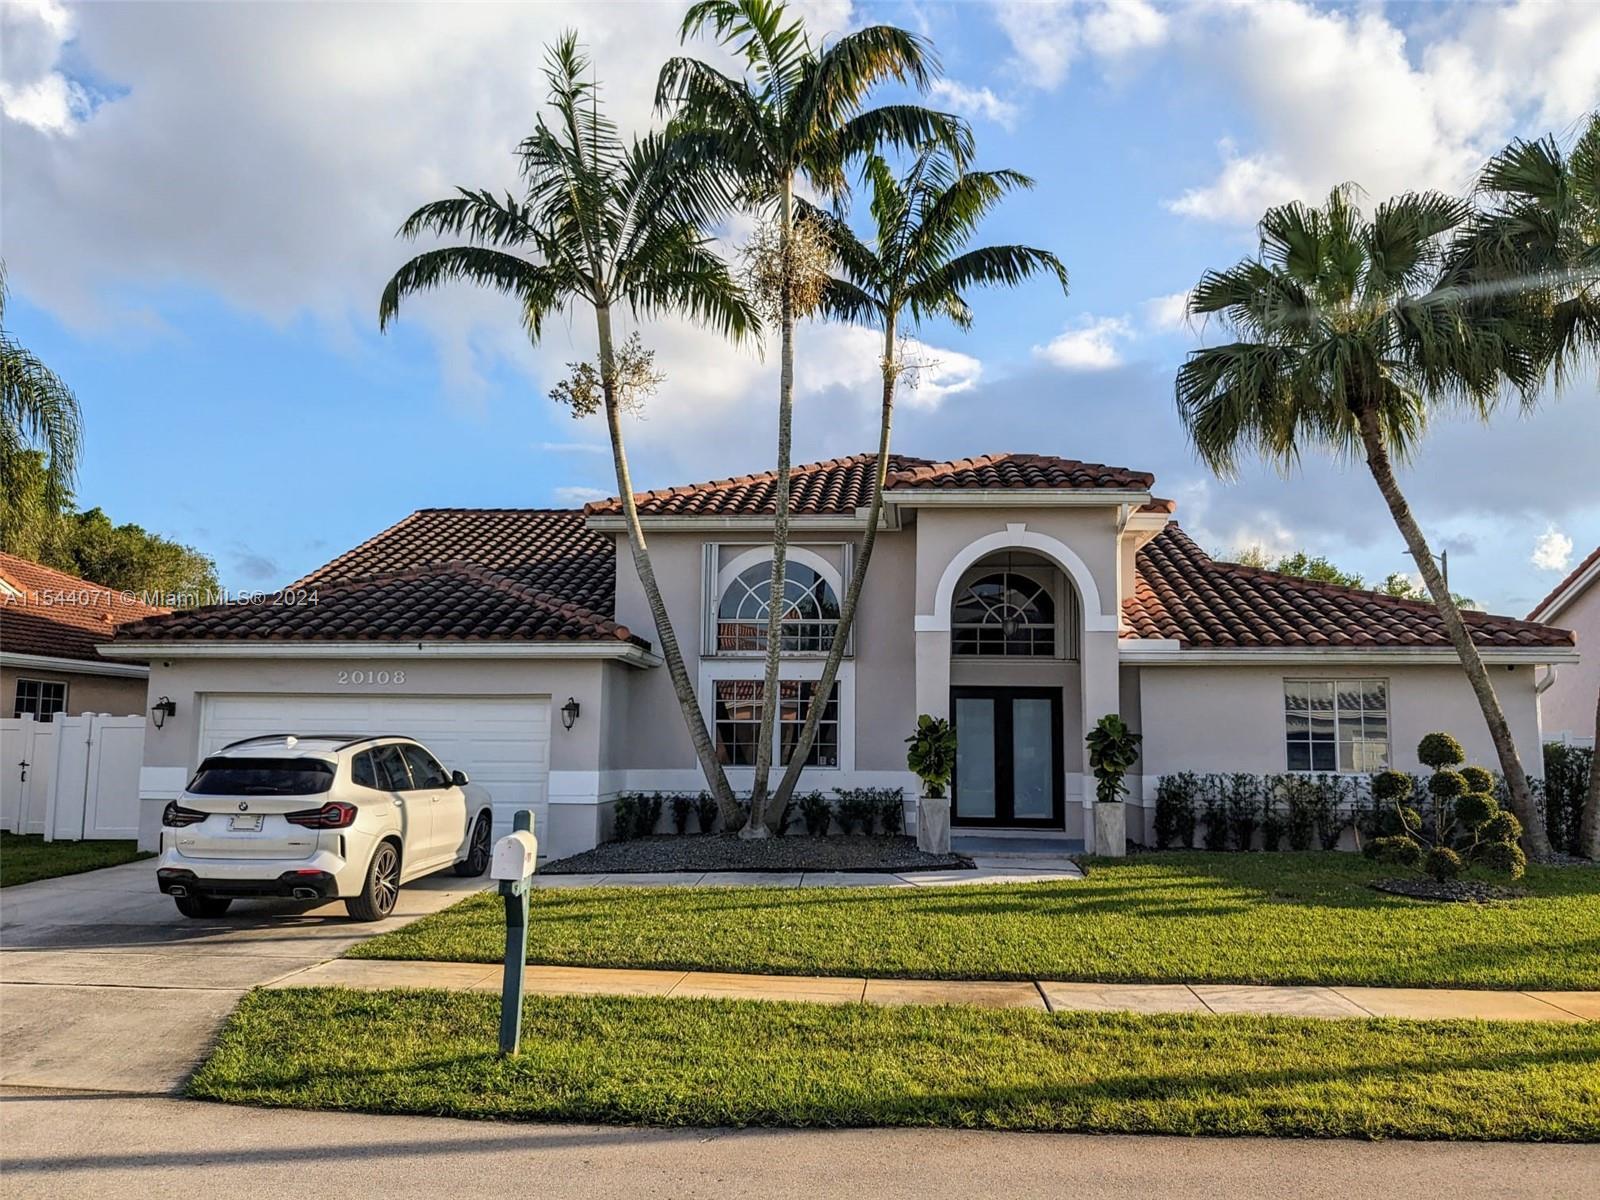 Photo of 20108 NW 9th Dr in Pembroke Pines, FL